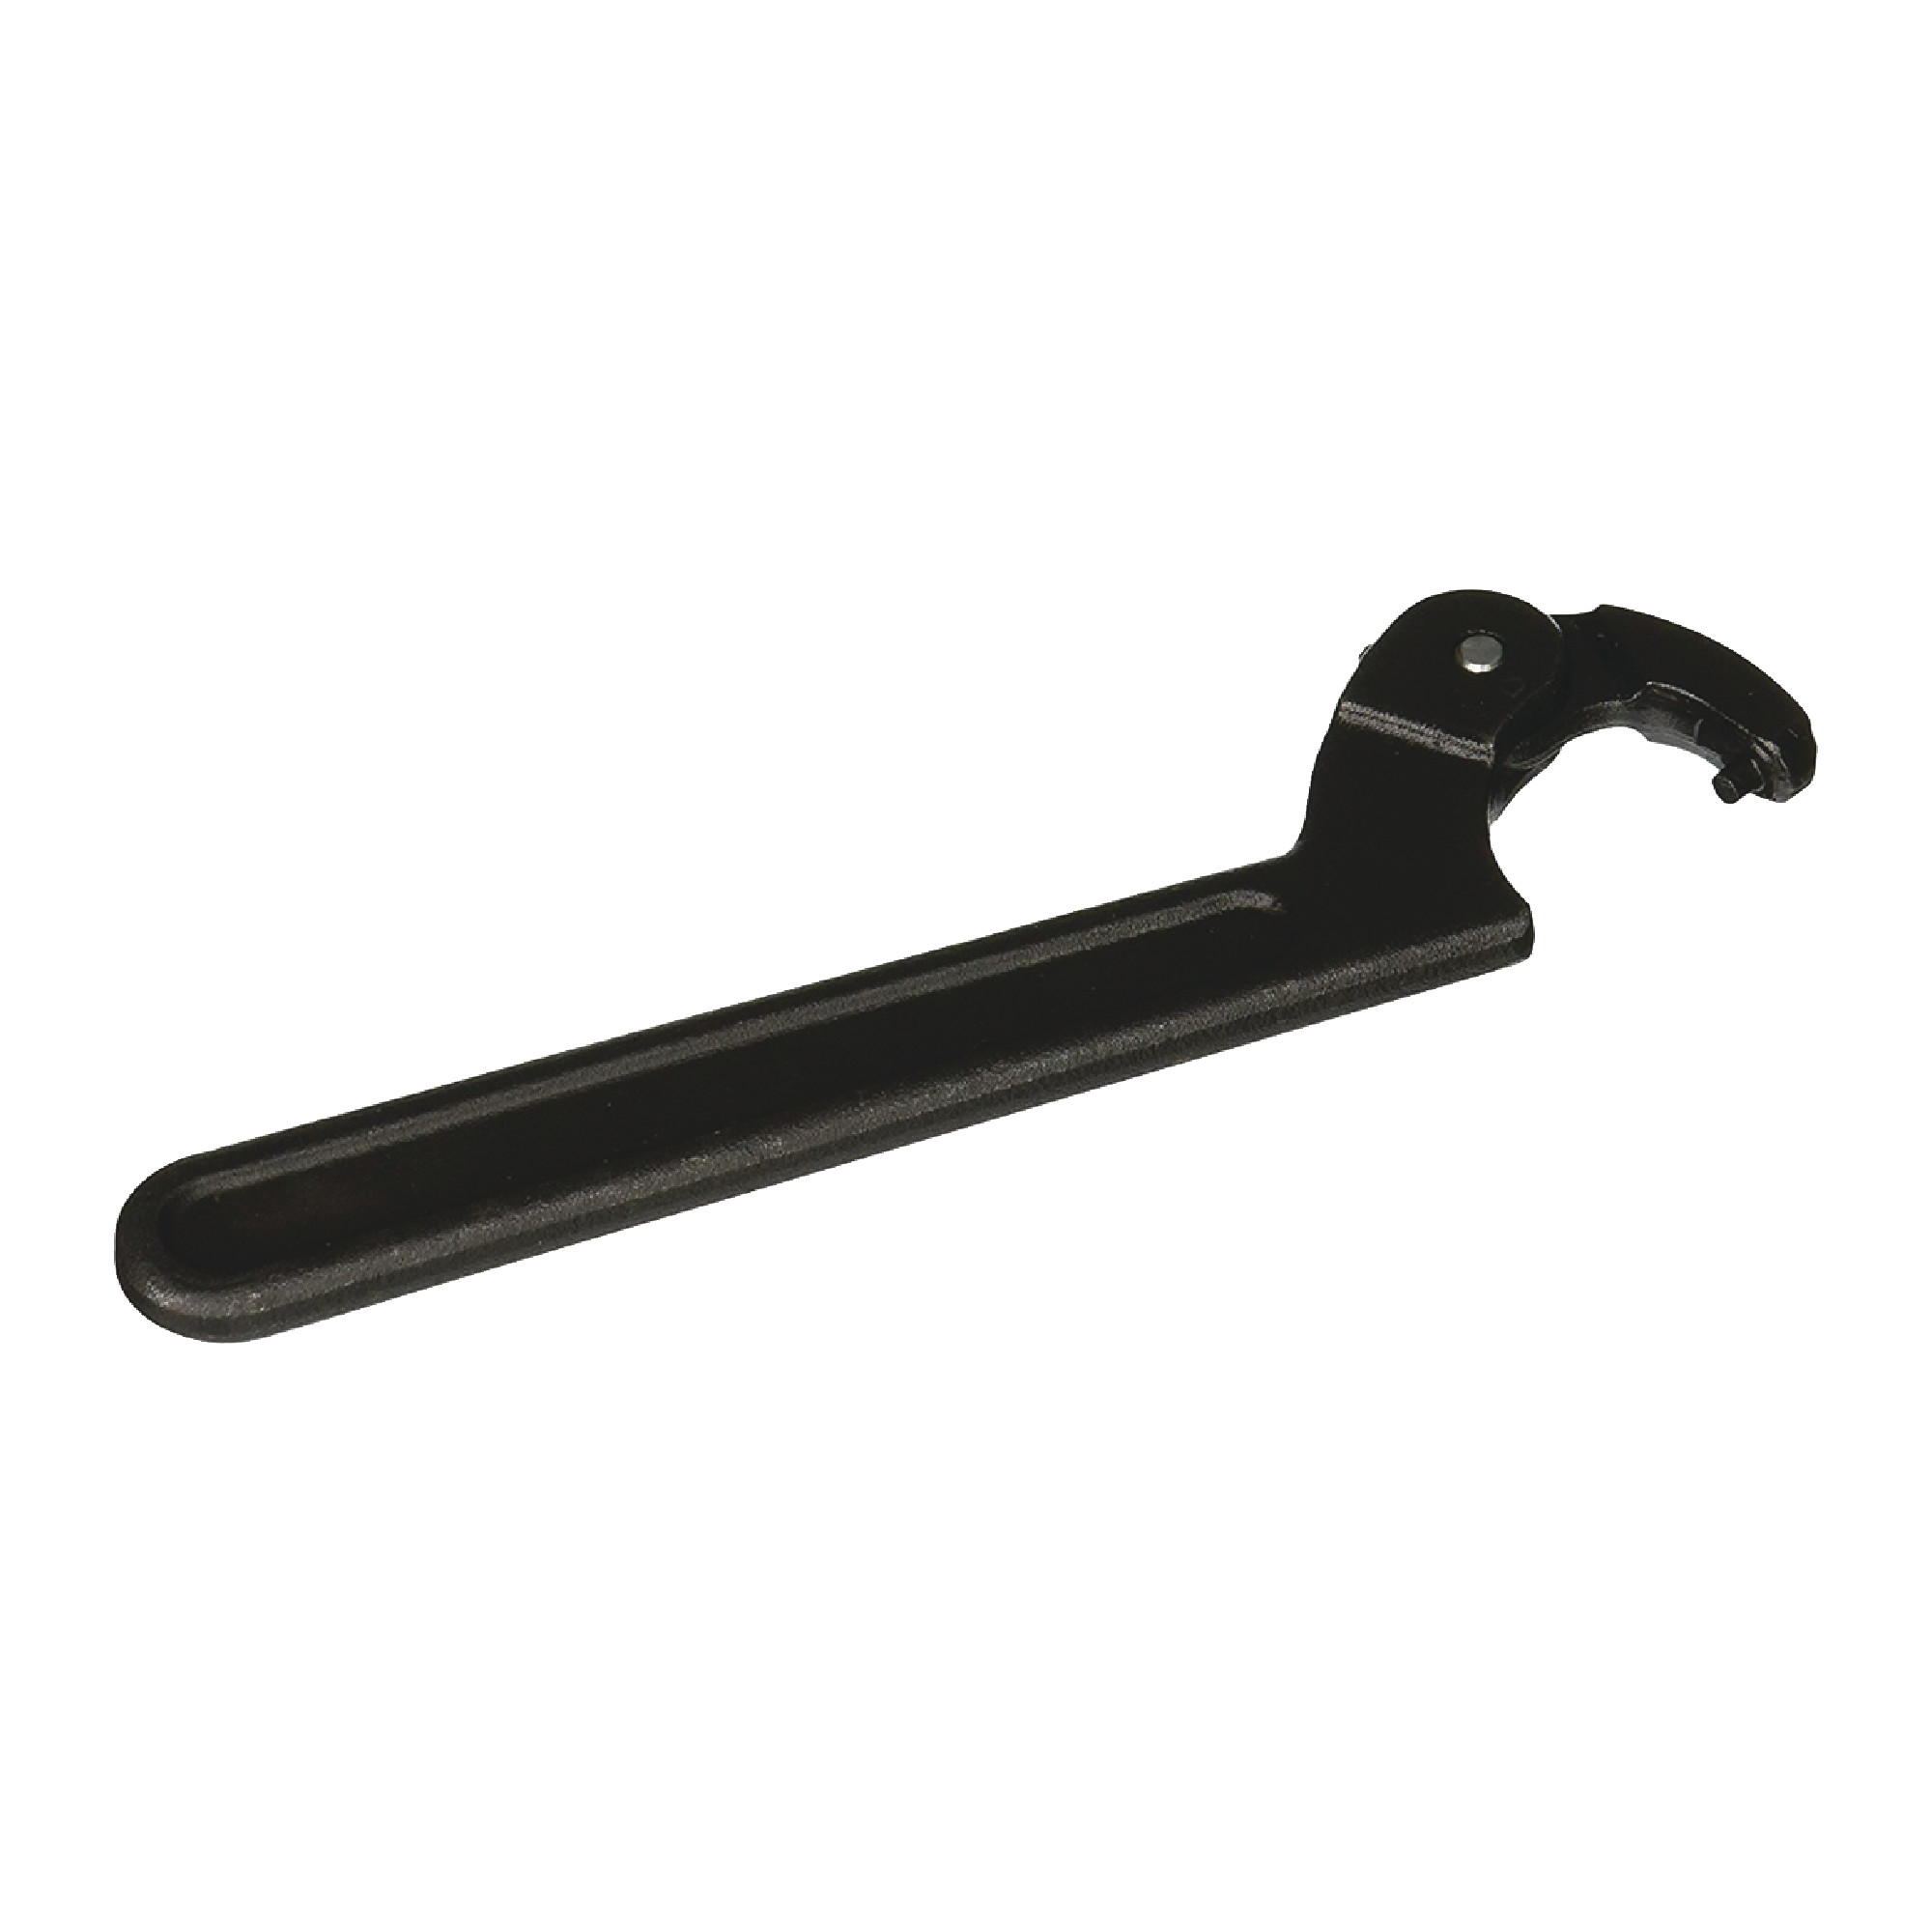 Adjustable Pin Spanner Wrench - Model: O-474A  Diameter: 4-1/2" - 6-1/4"  Overall Length: 9-7/8"